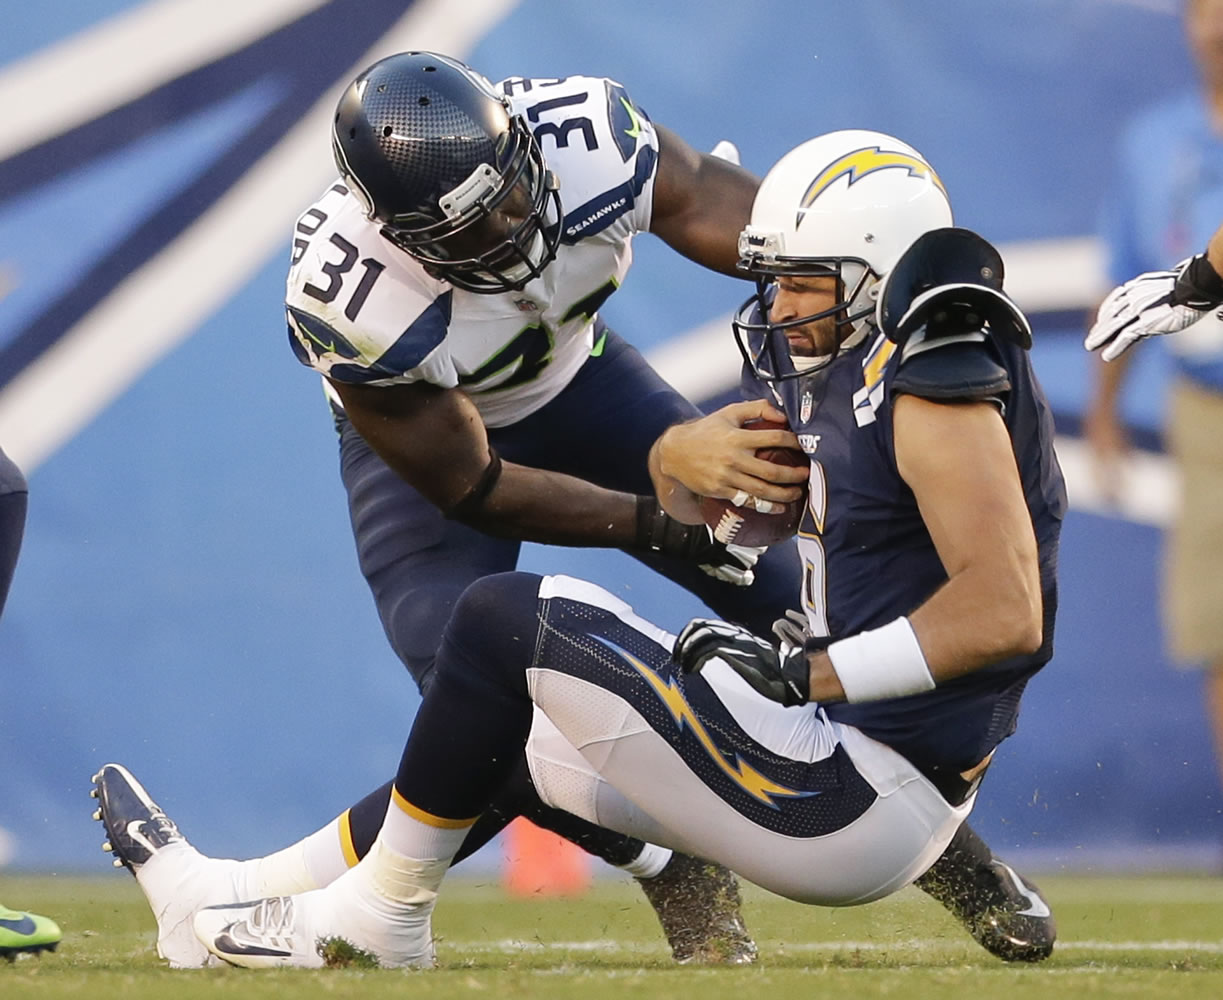 San Diego Chargers quarterback Charlie Whitehurst is sacked by Seattle Seahawks strong safety Kam Chancellor in the second quarter Thursday.